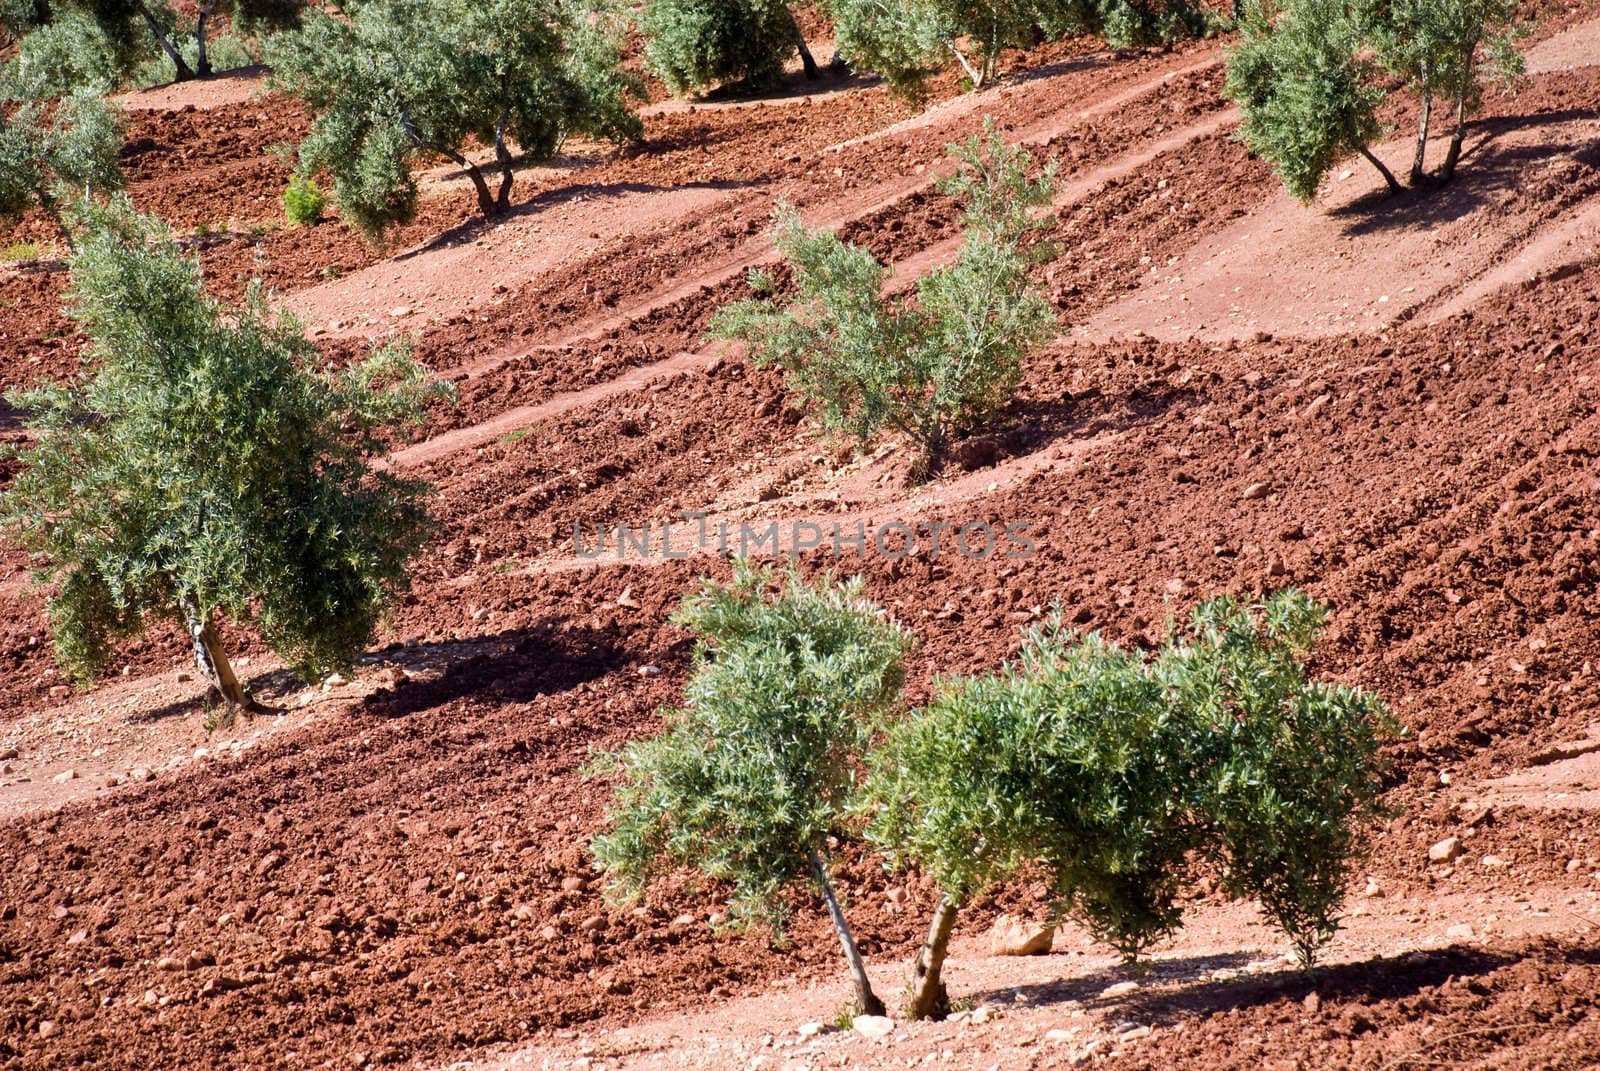 Olive grove in Andalucia, Spain.